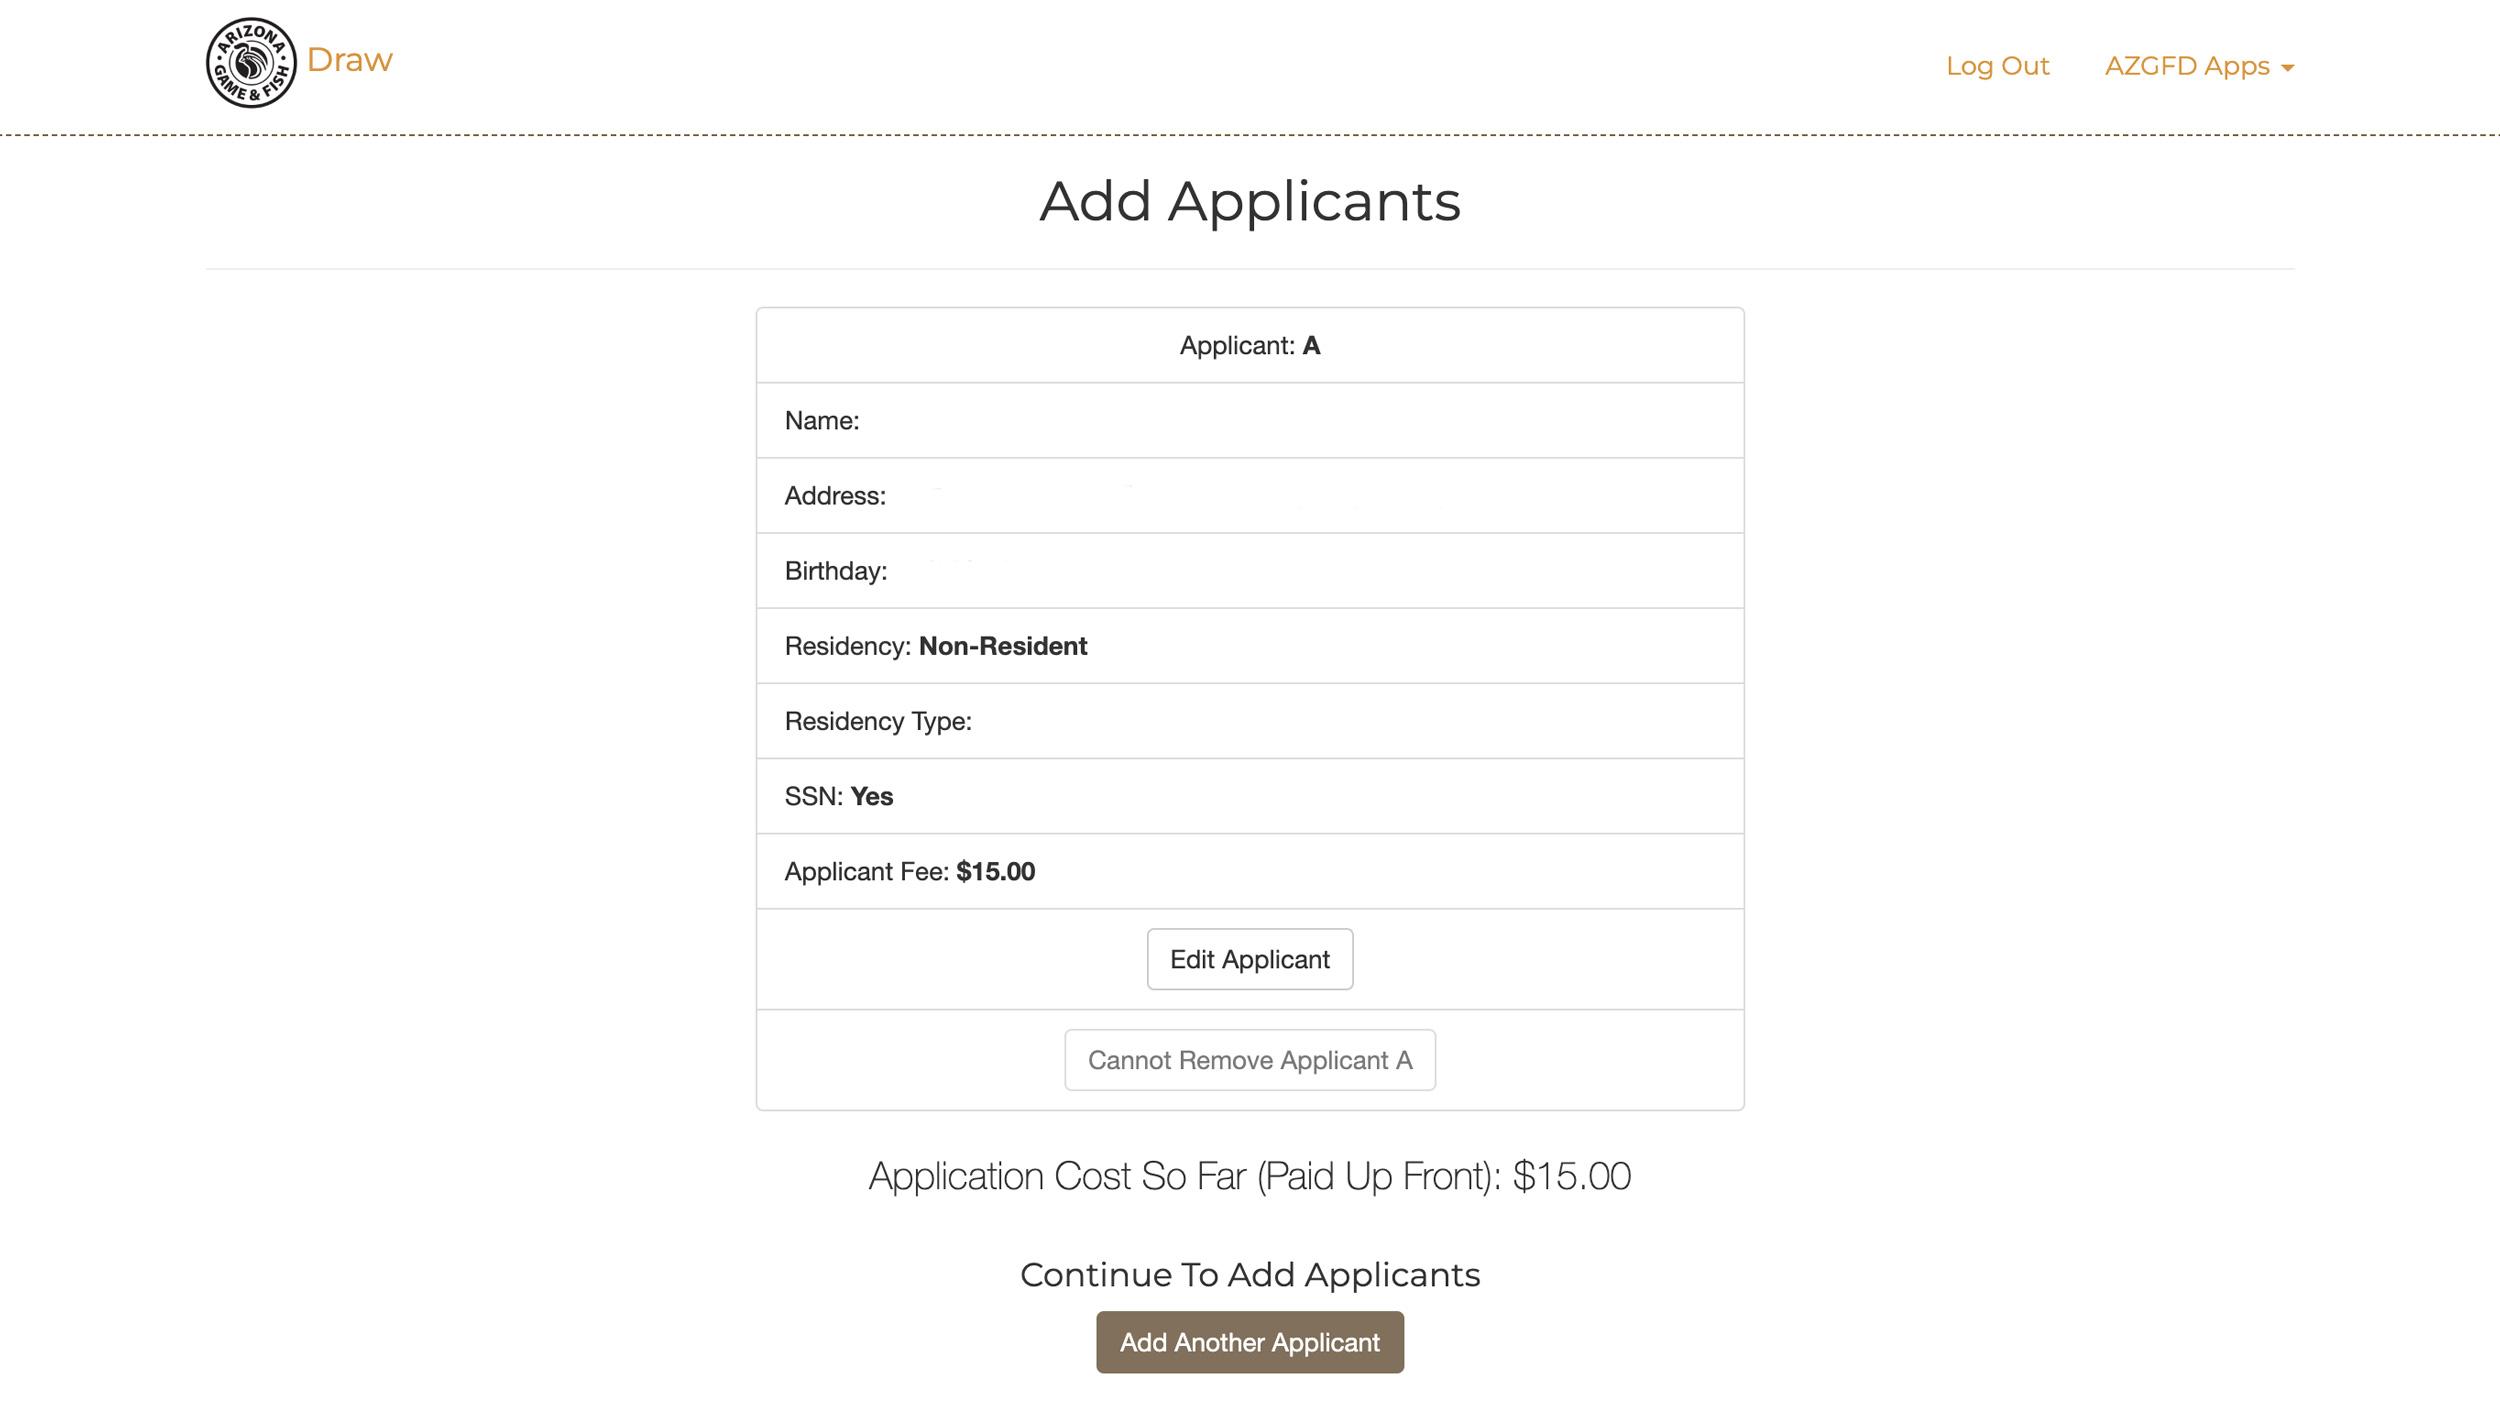 Reviewing applicant information and application fee